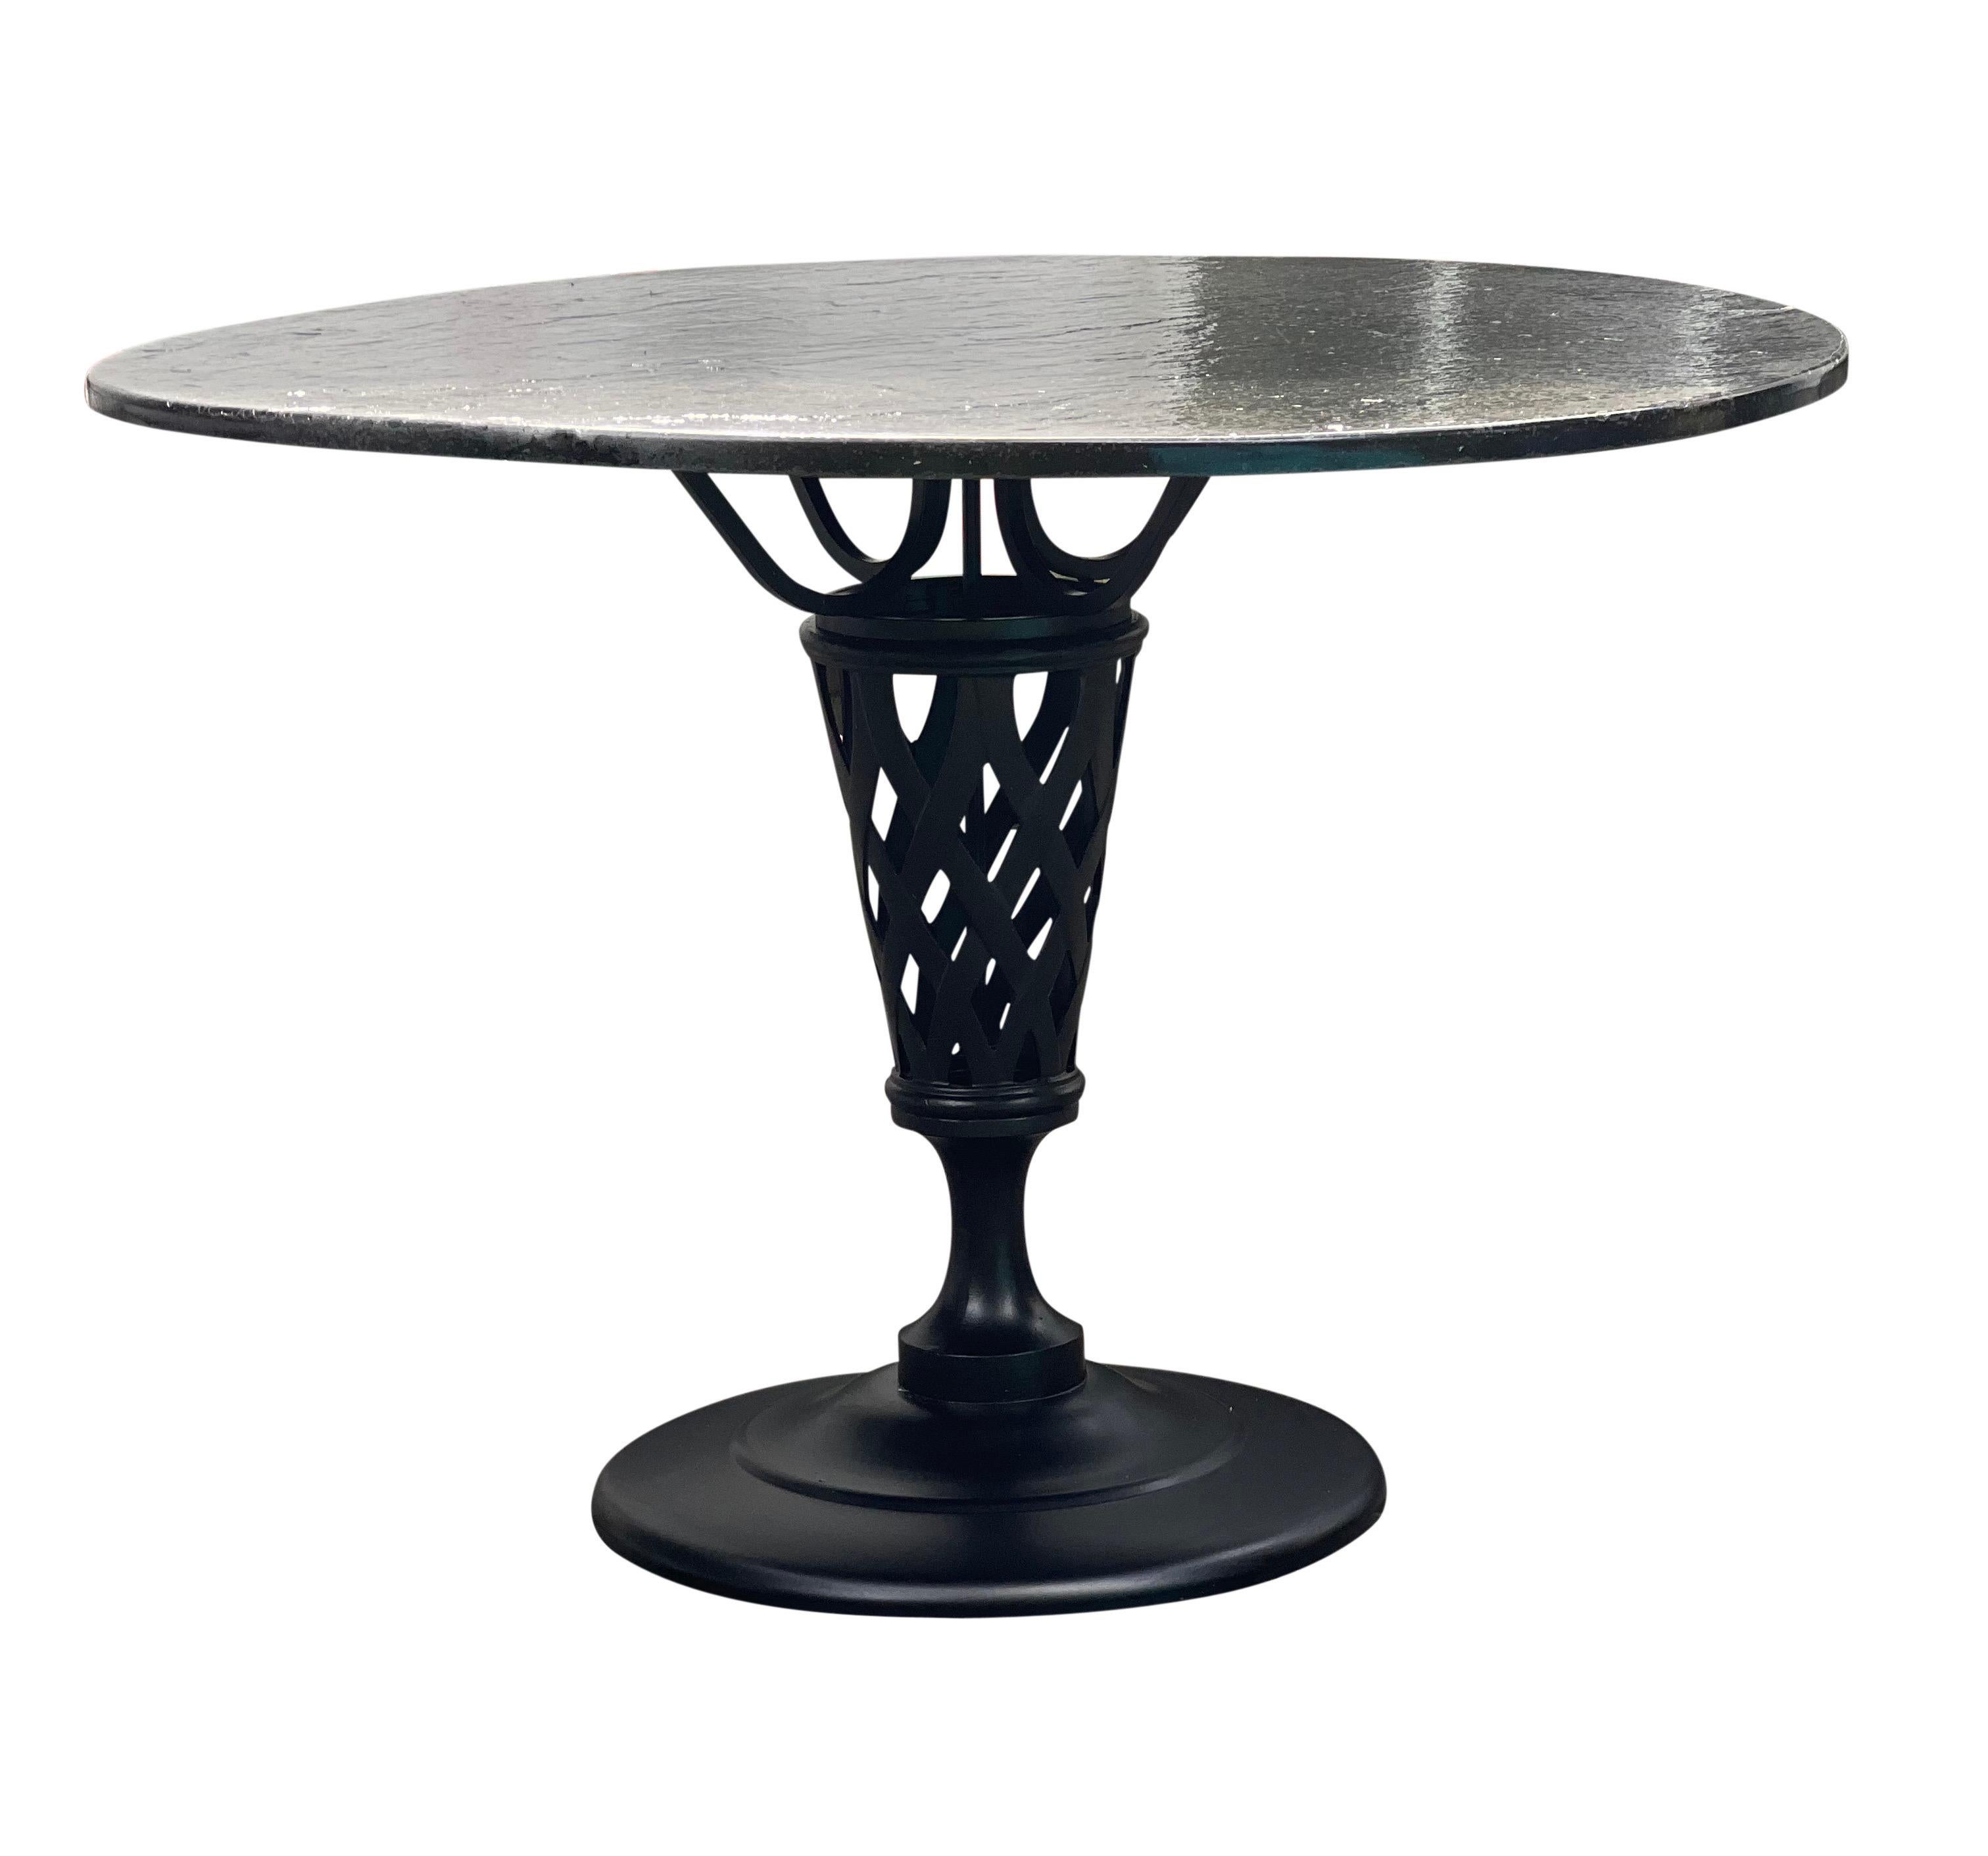 Fabulous vintage cast aluminum indoor/outdoor dining set newly reupholstered, professionally sandblasted and powder-coated in matte black with a texturized black slate tabletop.

This unique table features a pedestal base with a chunky basketweave